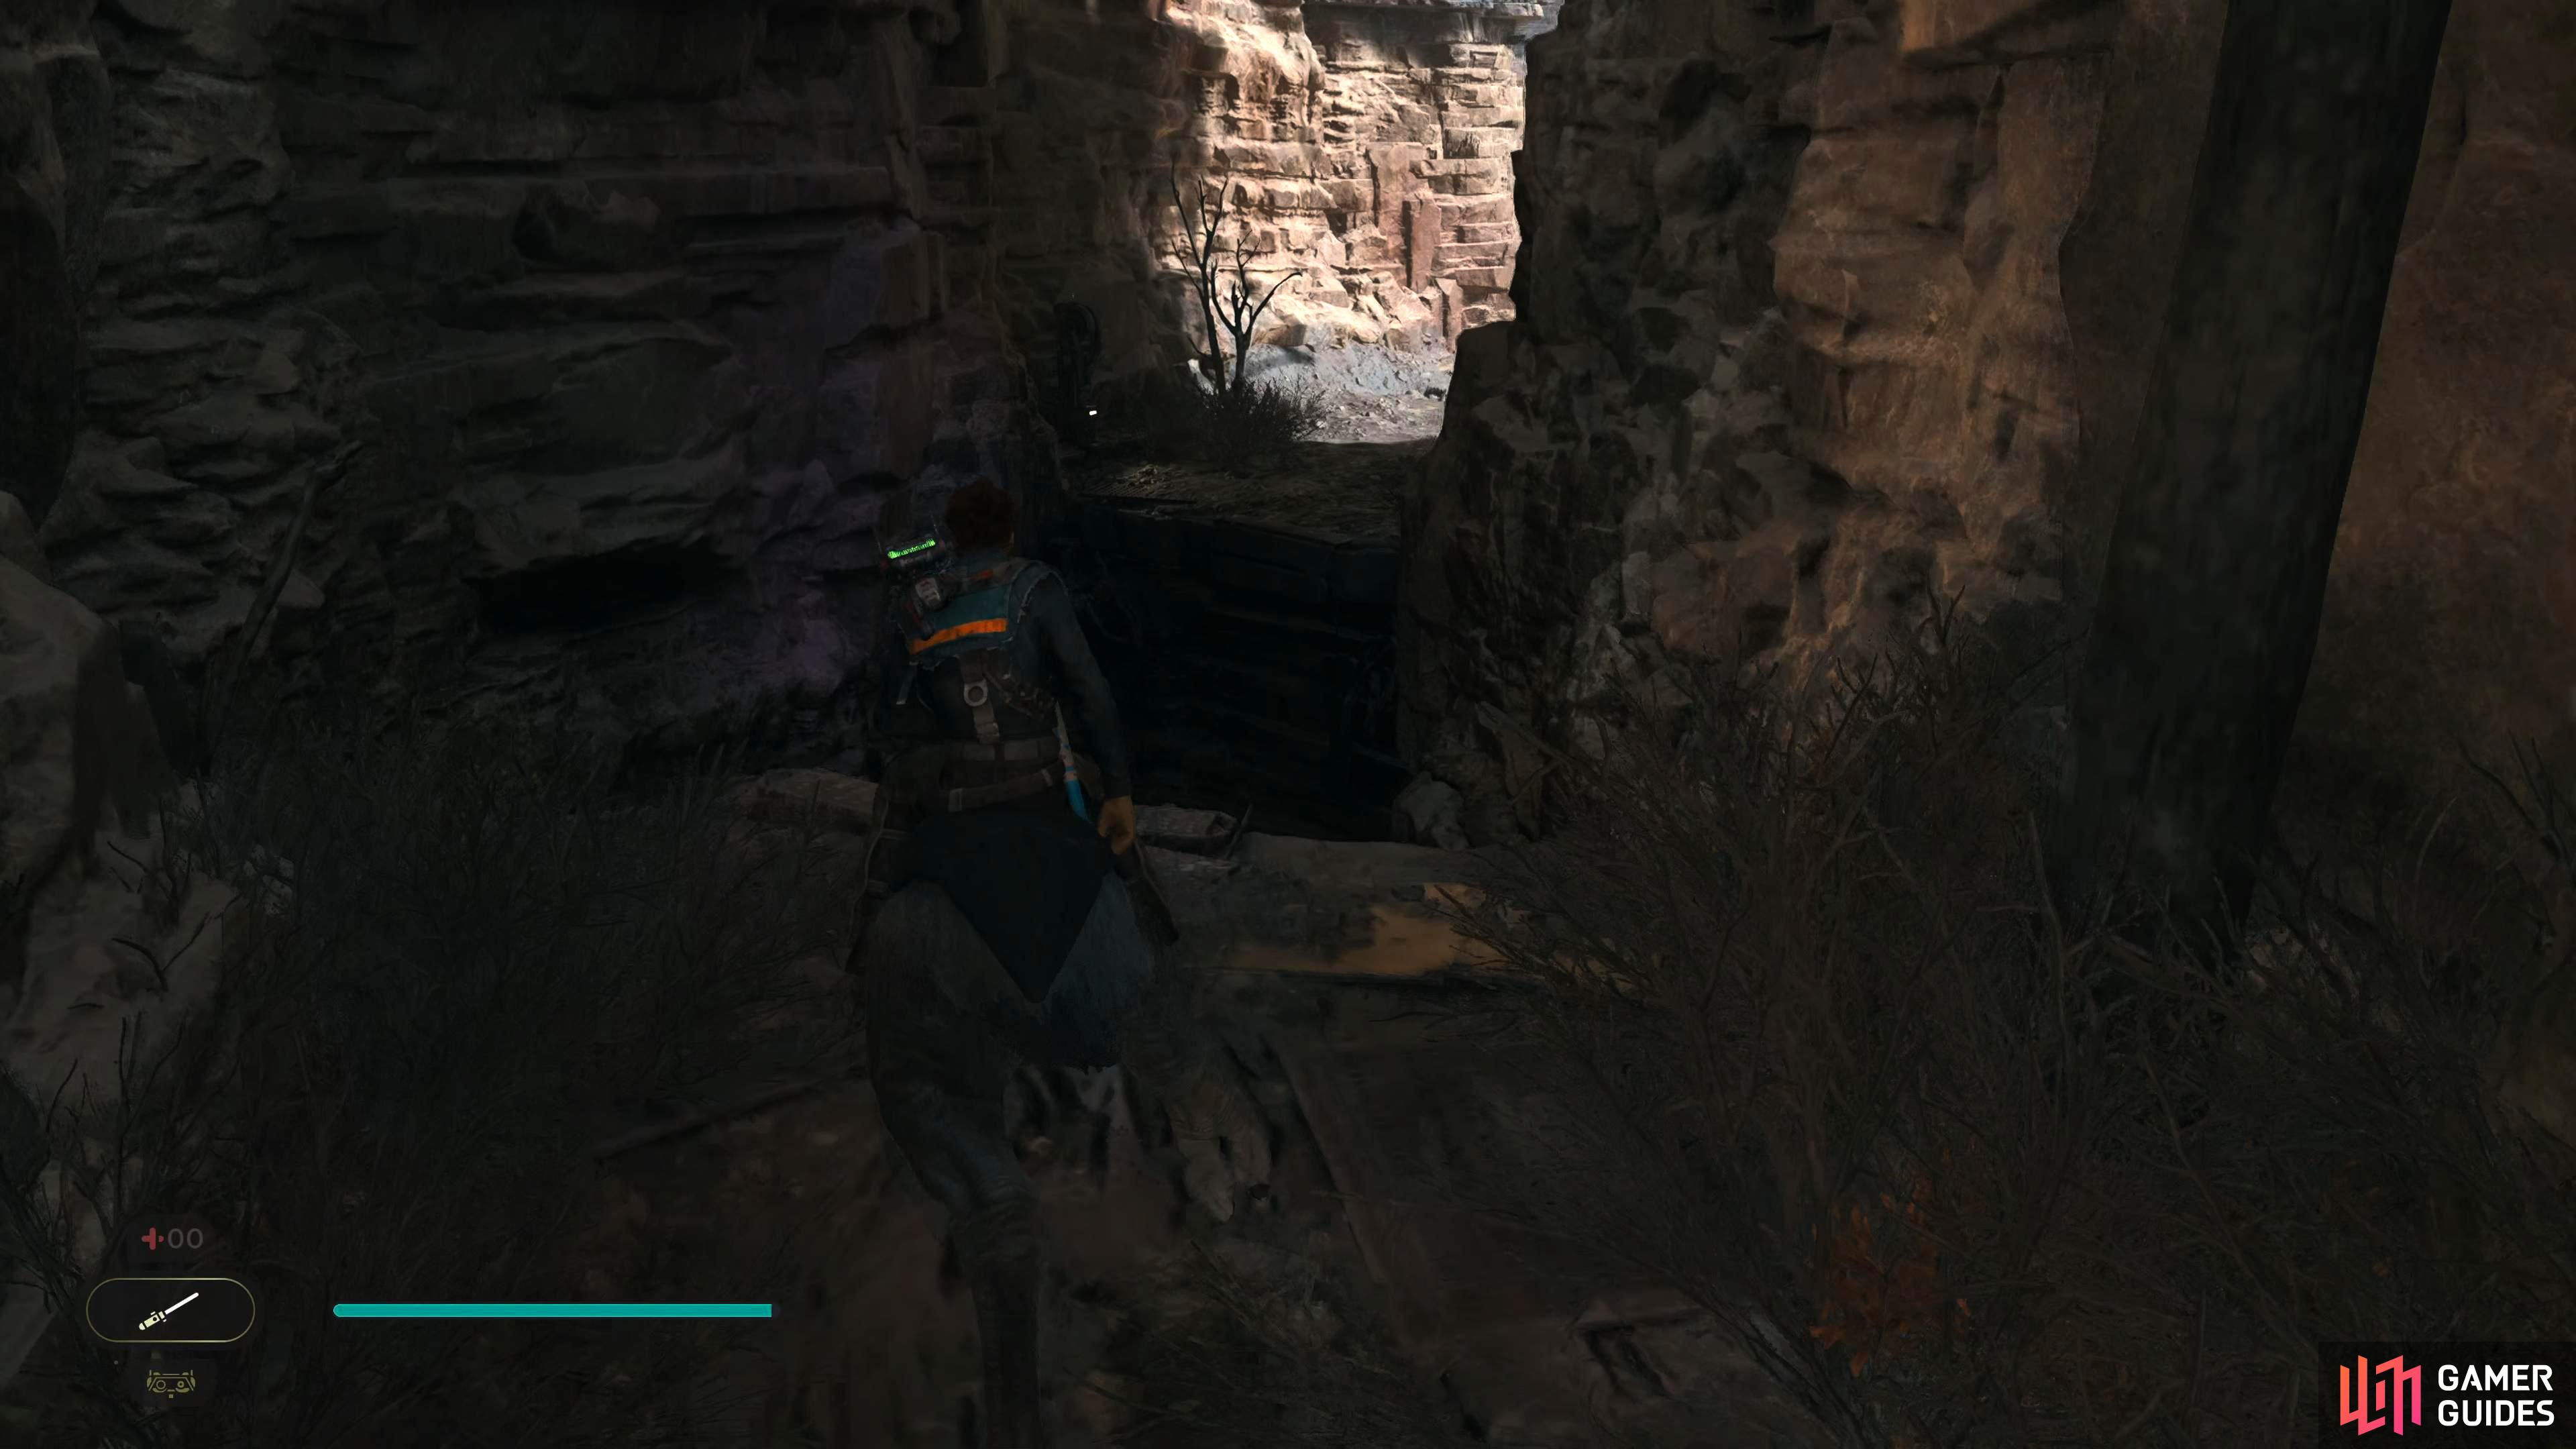 You can use the mount to jump across the gap, although we're not sure where it ends up…